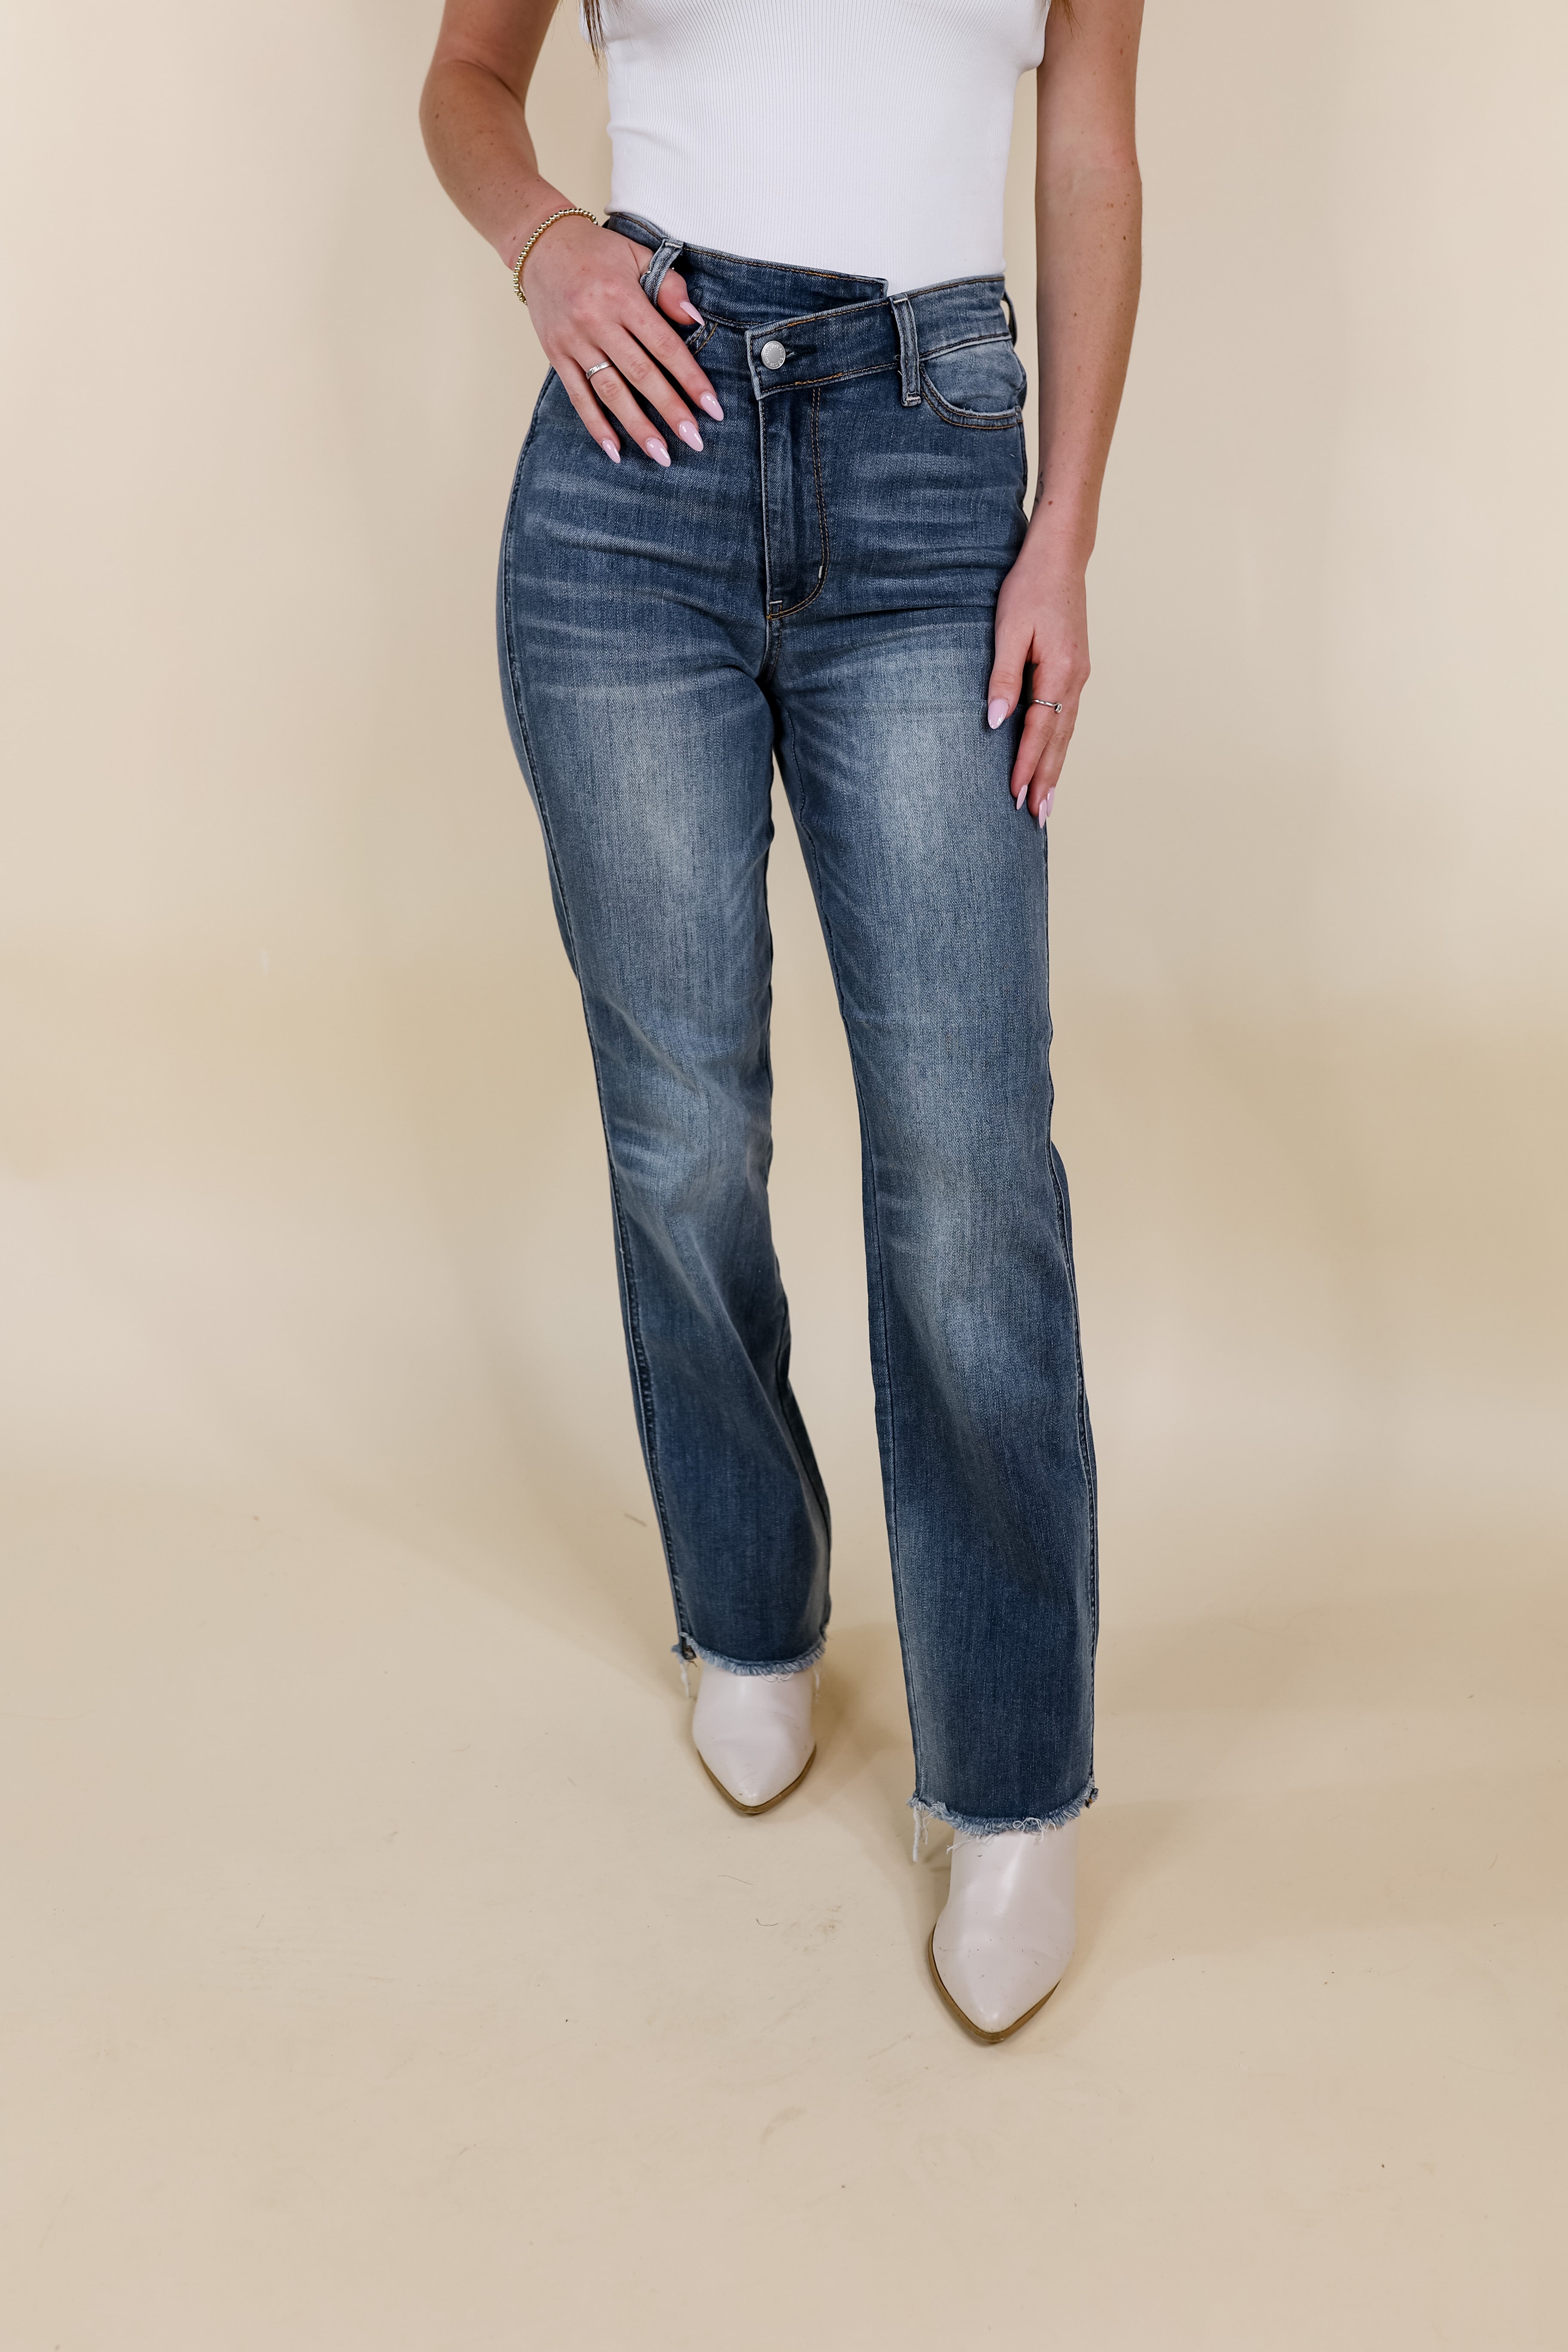 Judy Blue | Sure And Steady Criss-Cross Waistband Dad Jeans in Medium Wash - Giddy Up Glamour Boutique